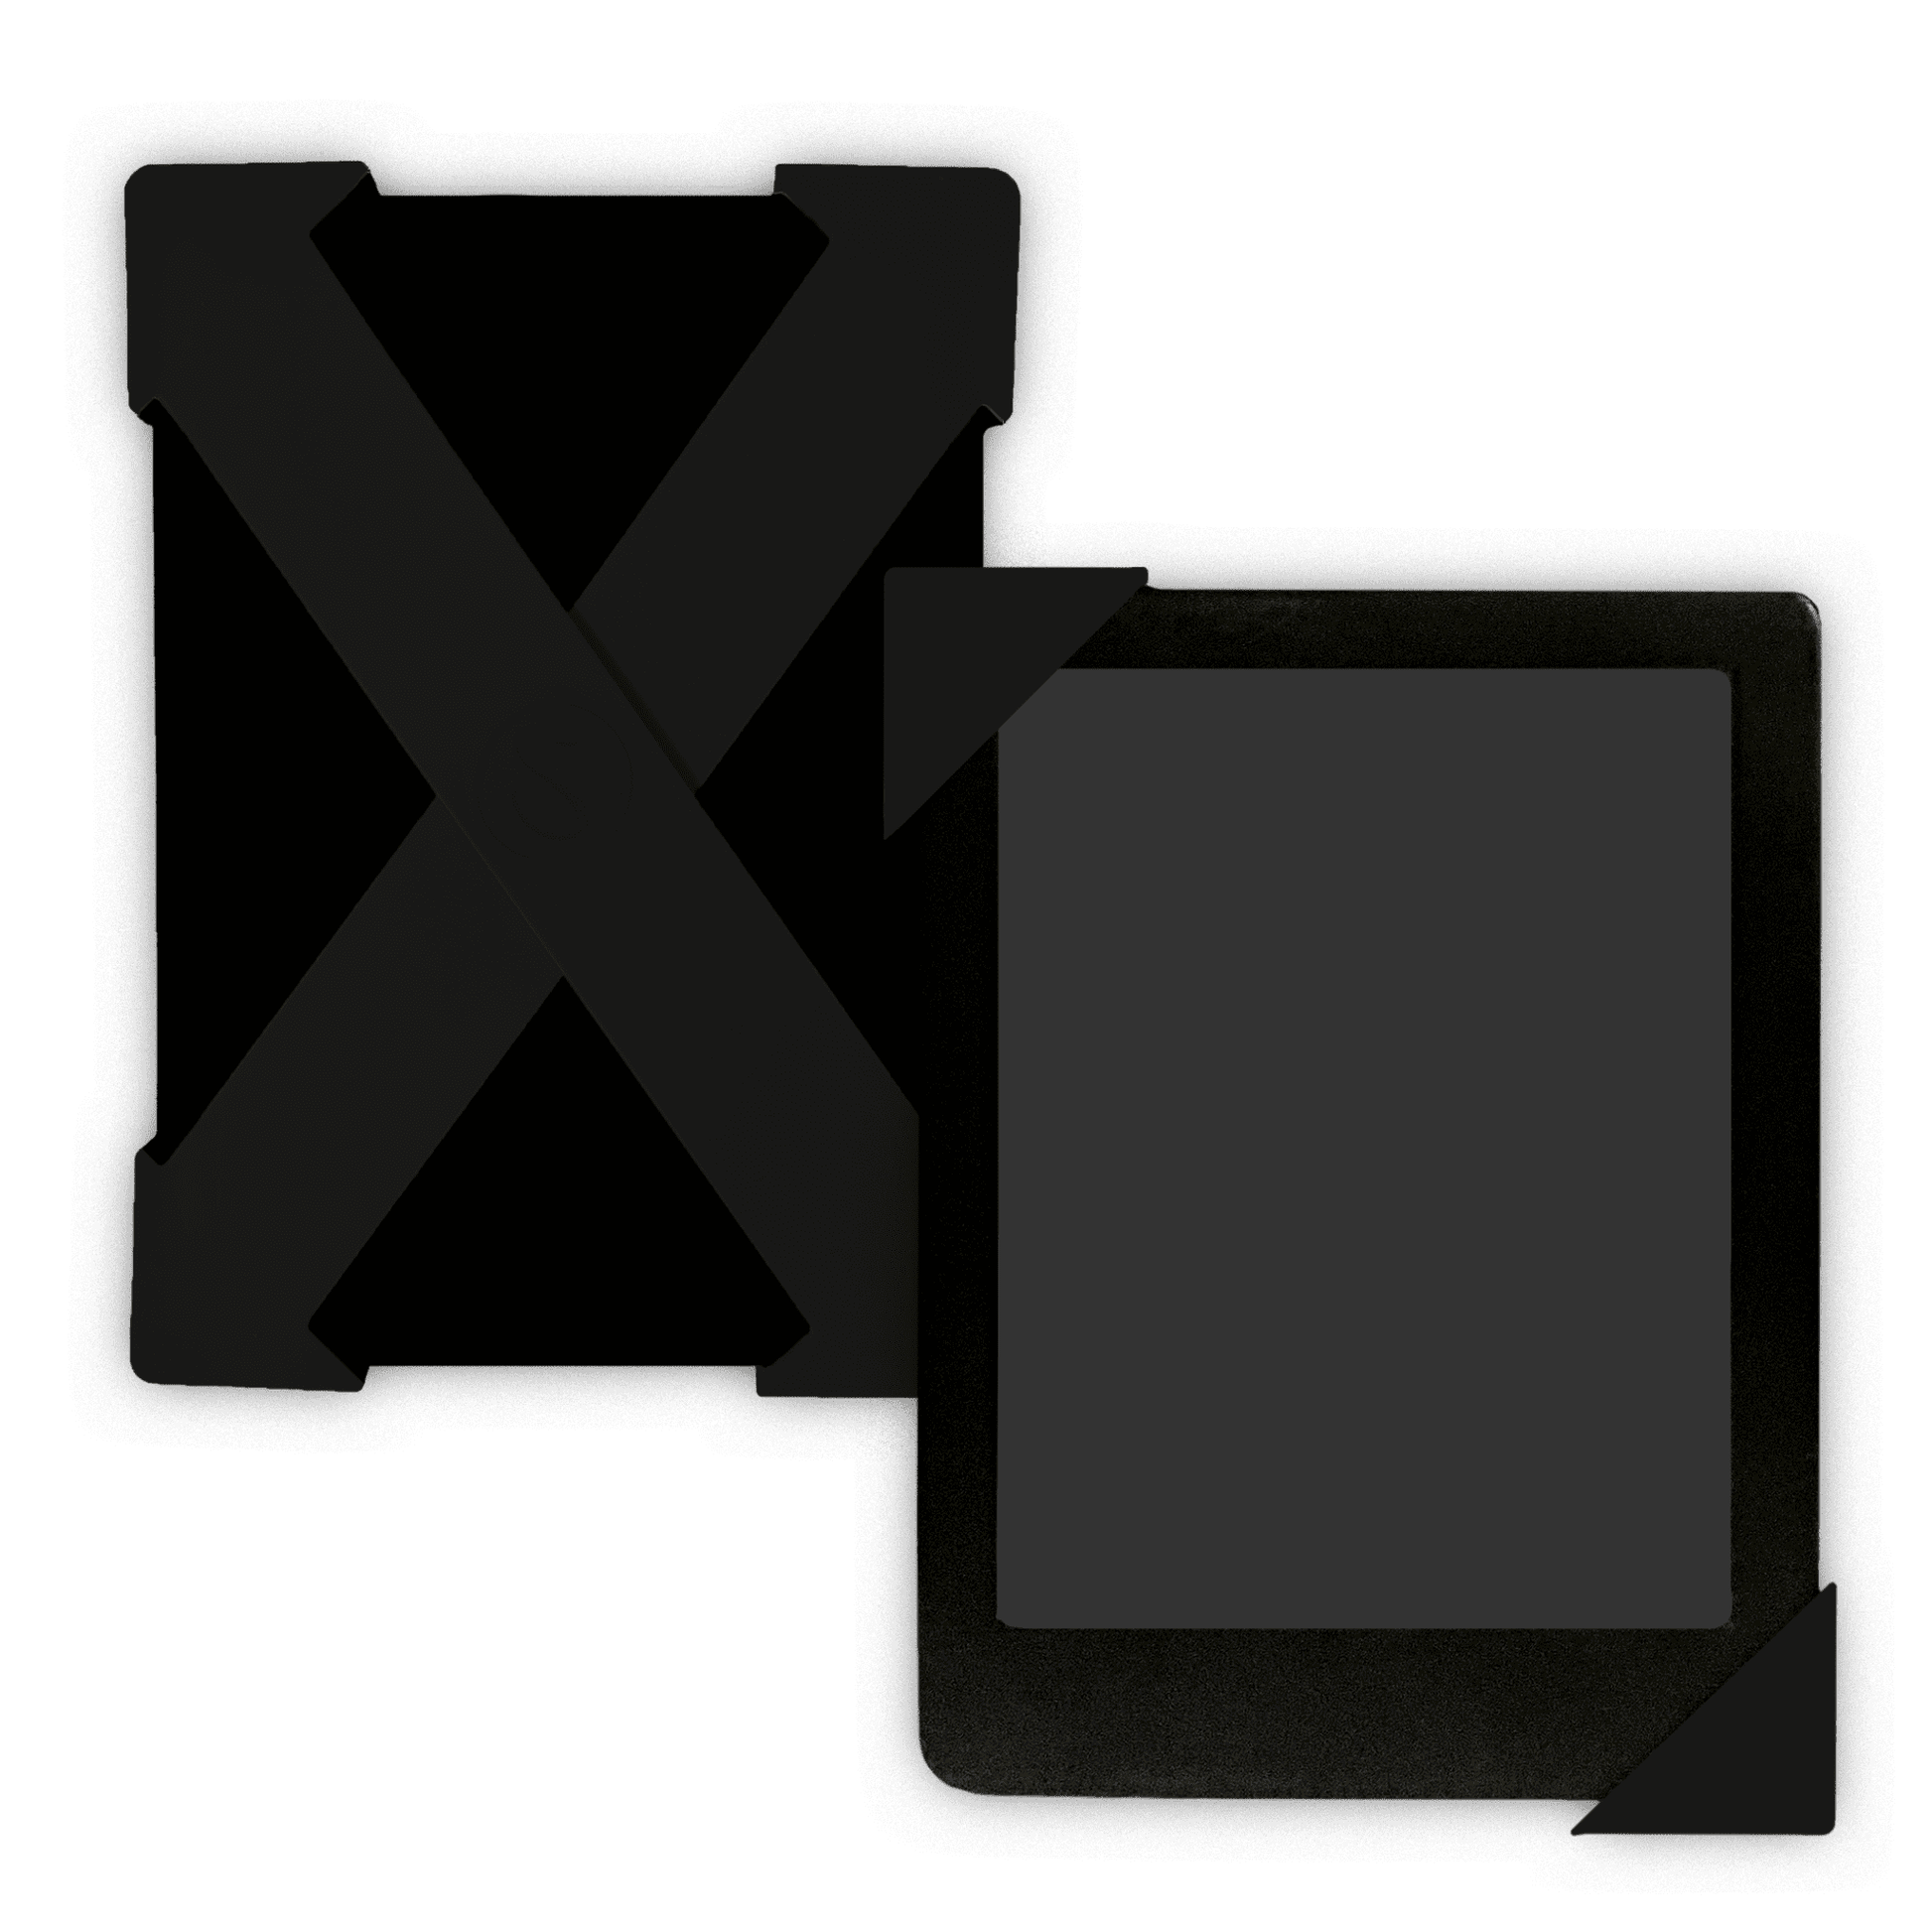 Strapsicle - Shop the Best Kindle Accessory - Available in Black Color